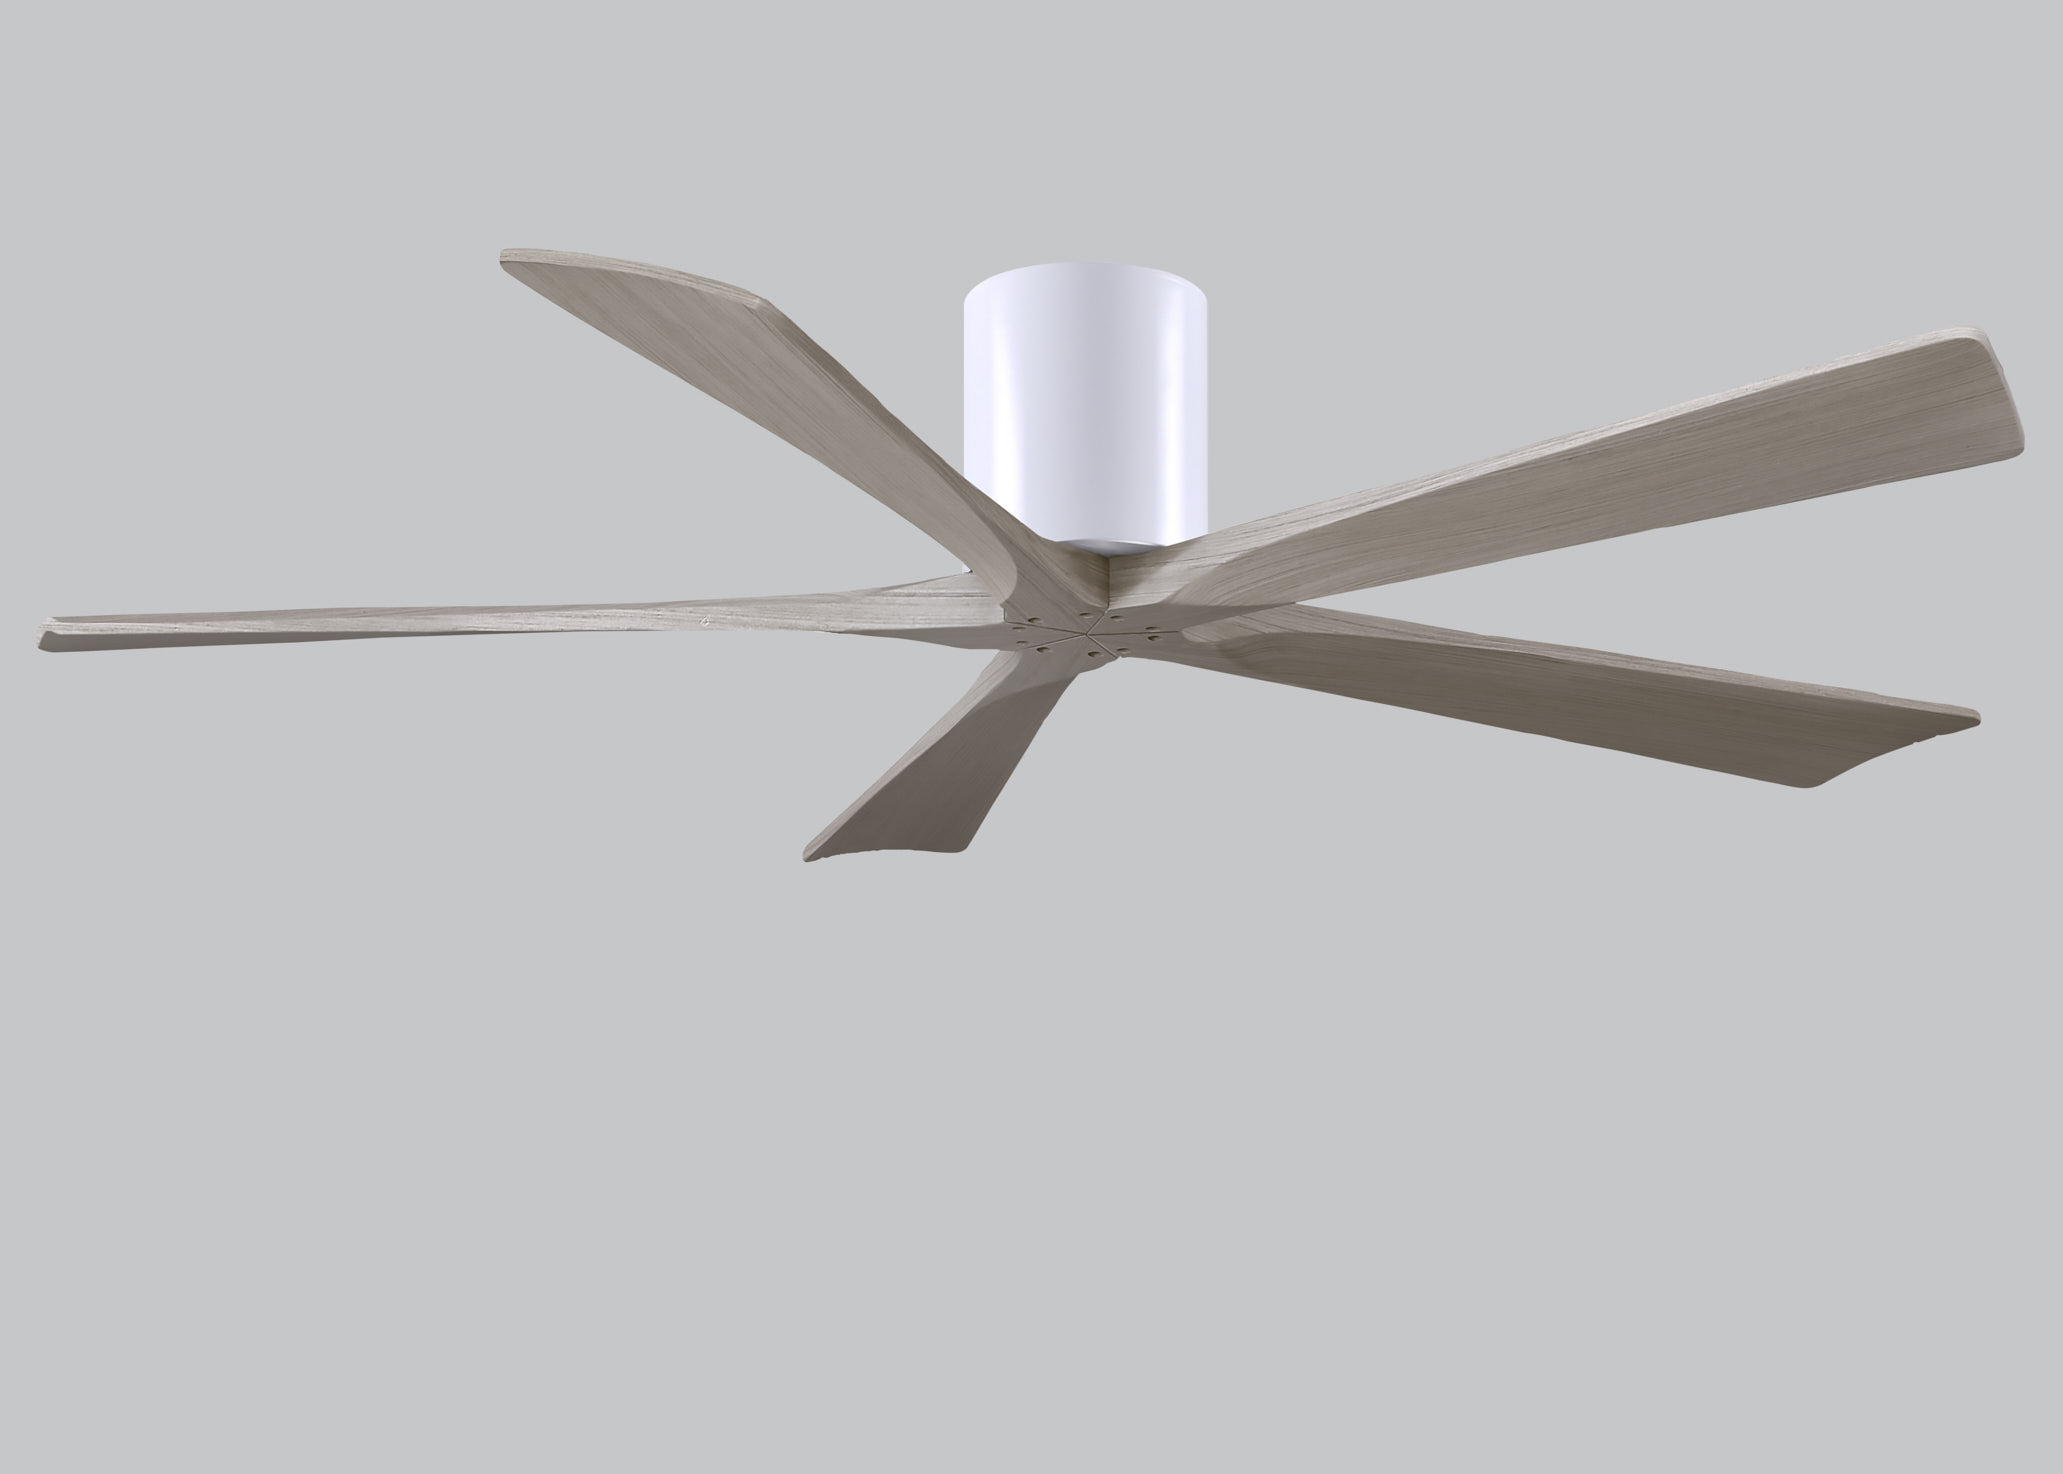 Irene-5H 6-speed ceiling fan in gloss white finish with 60